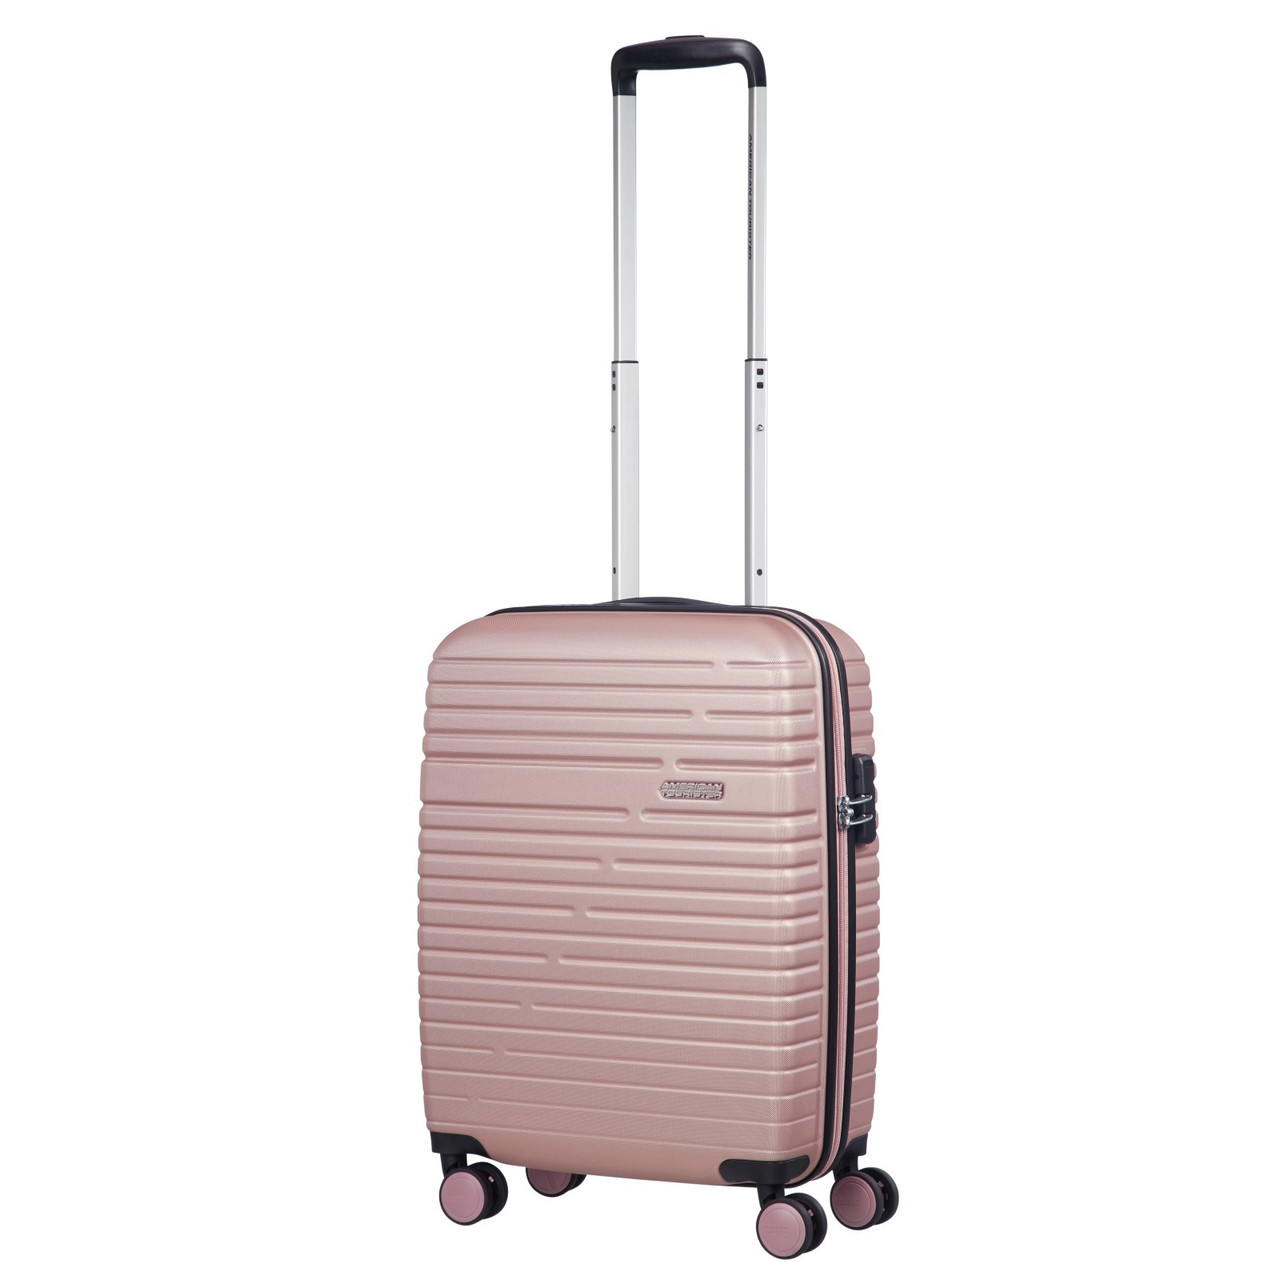 American Tourister Aero Cabin Suitcase at Luggage Superstore